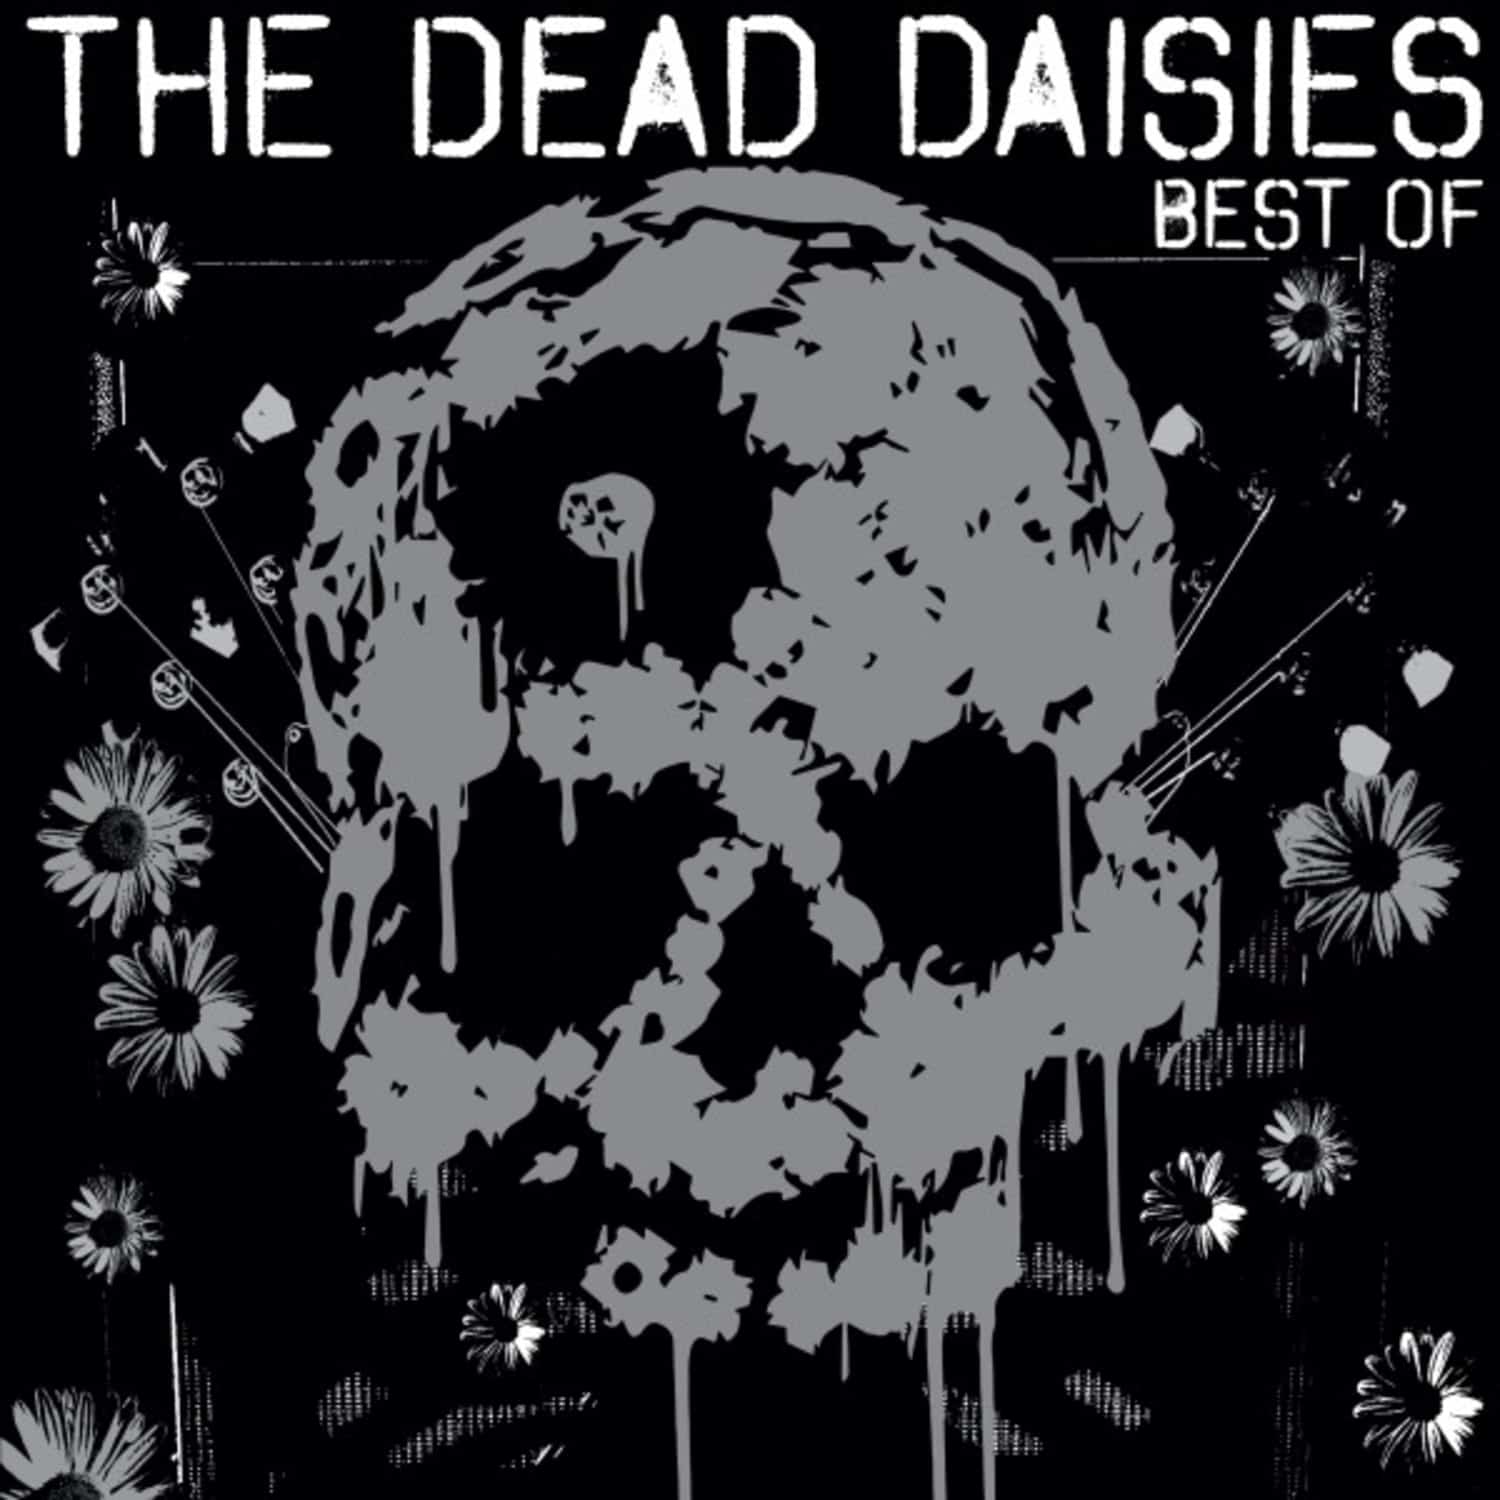  The Dead Daisies - BEST OF 